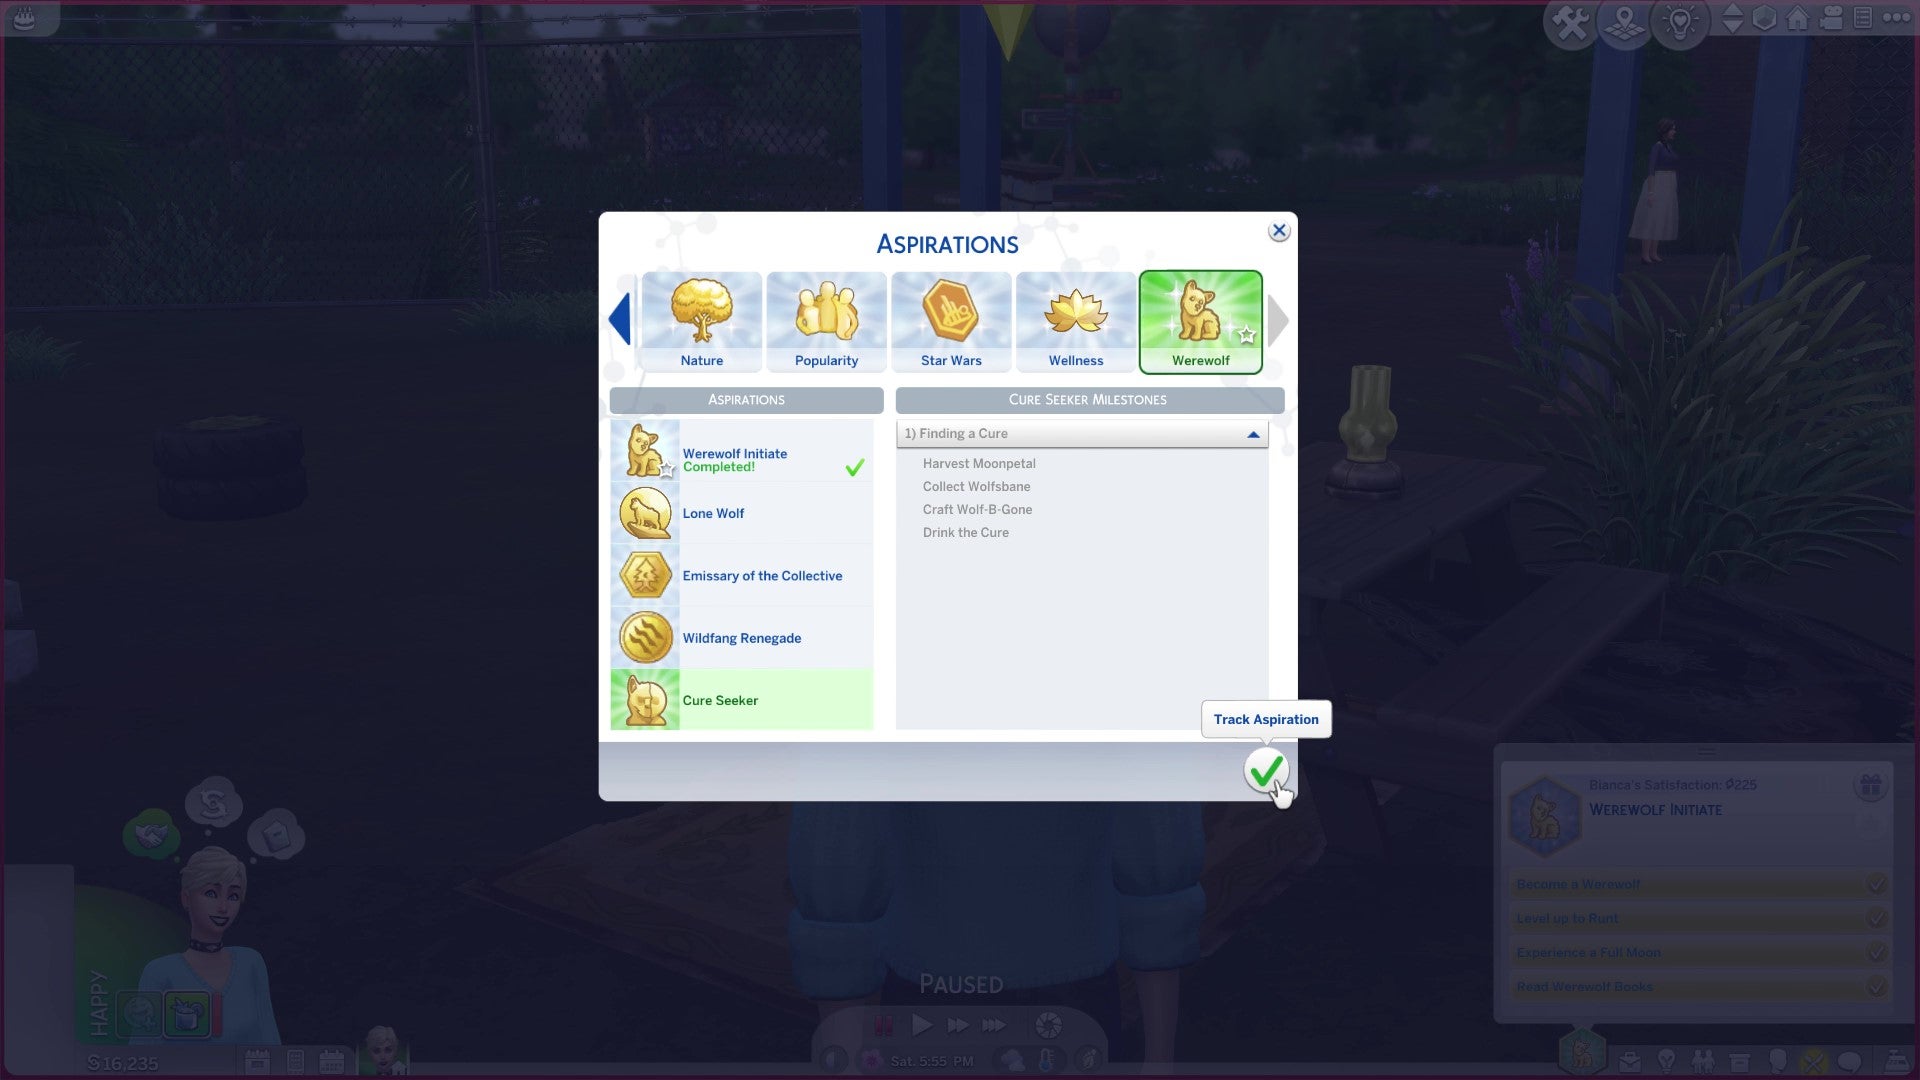 The werewolf aspiration selection pop-up in The Sims 4 Werewolves. The Sim has completed the first aspiration and is now being given the choice between four new aspirations: joining either of the two werewolf gangs, becoming a lone wolf, or seeking a cure.